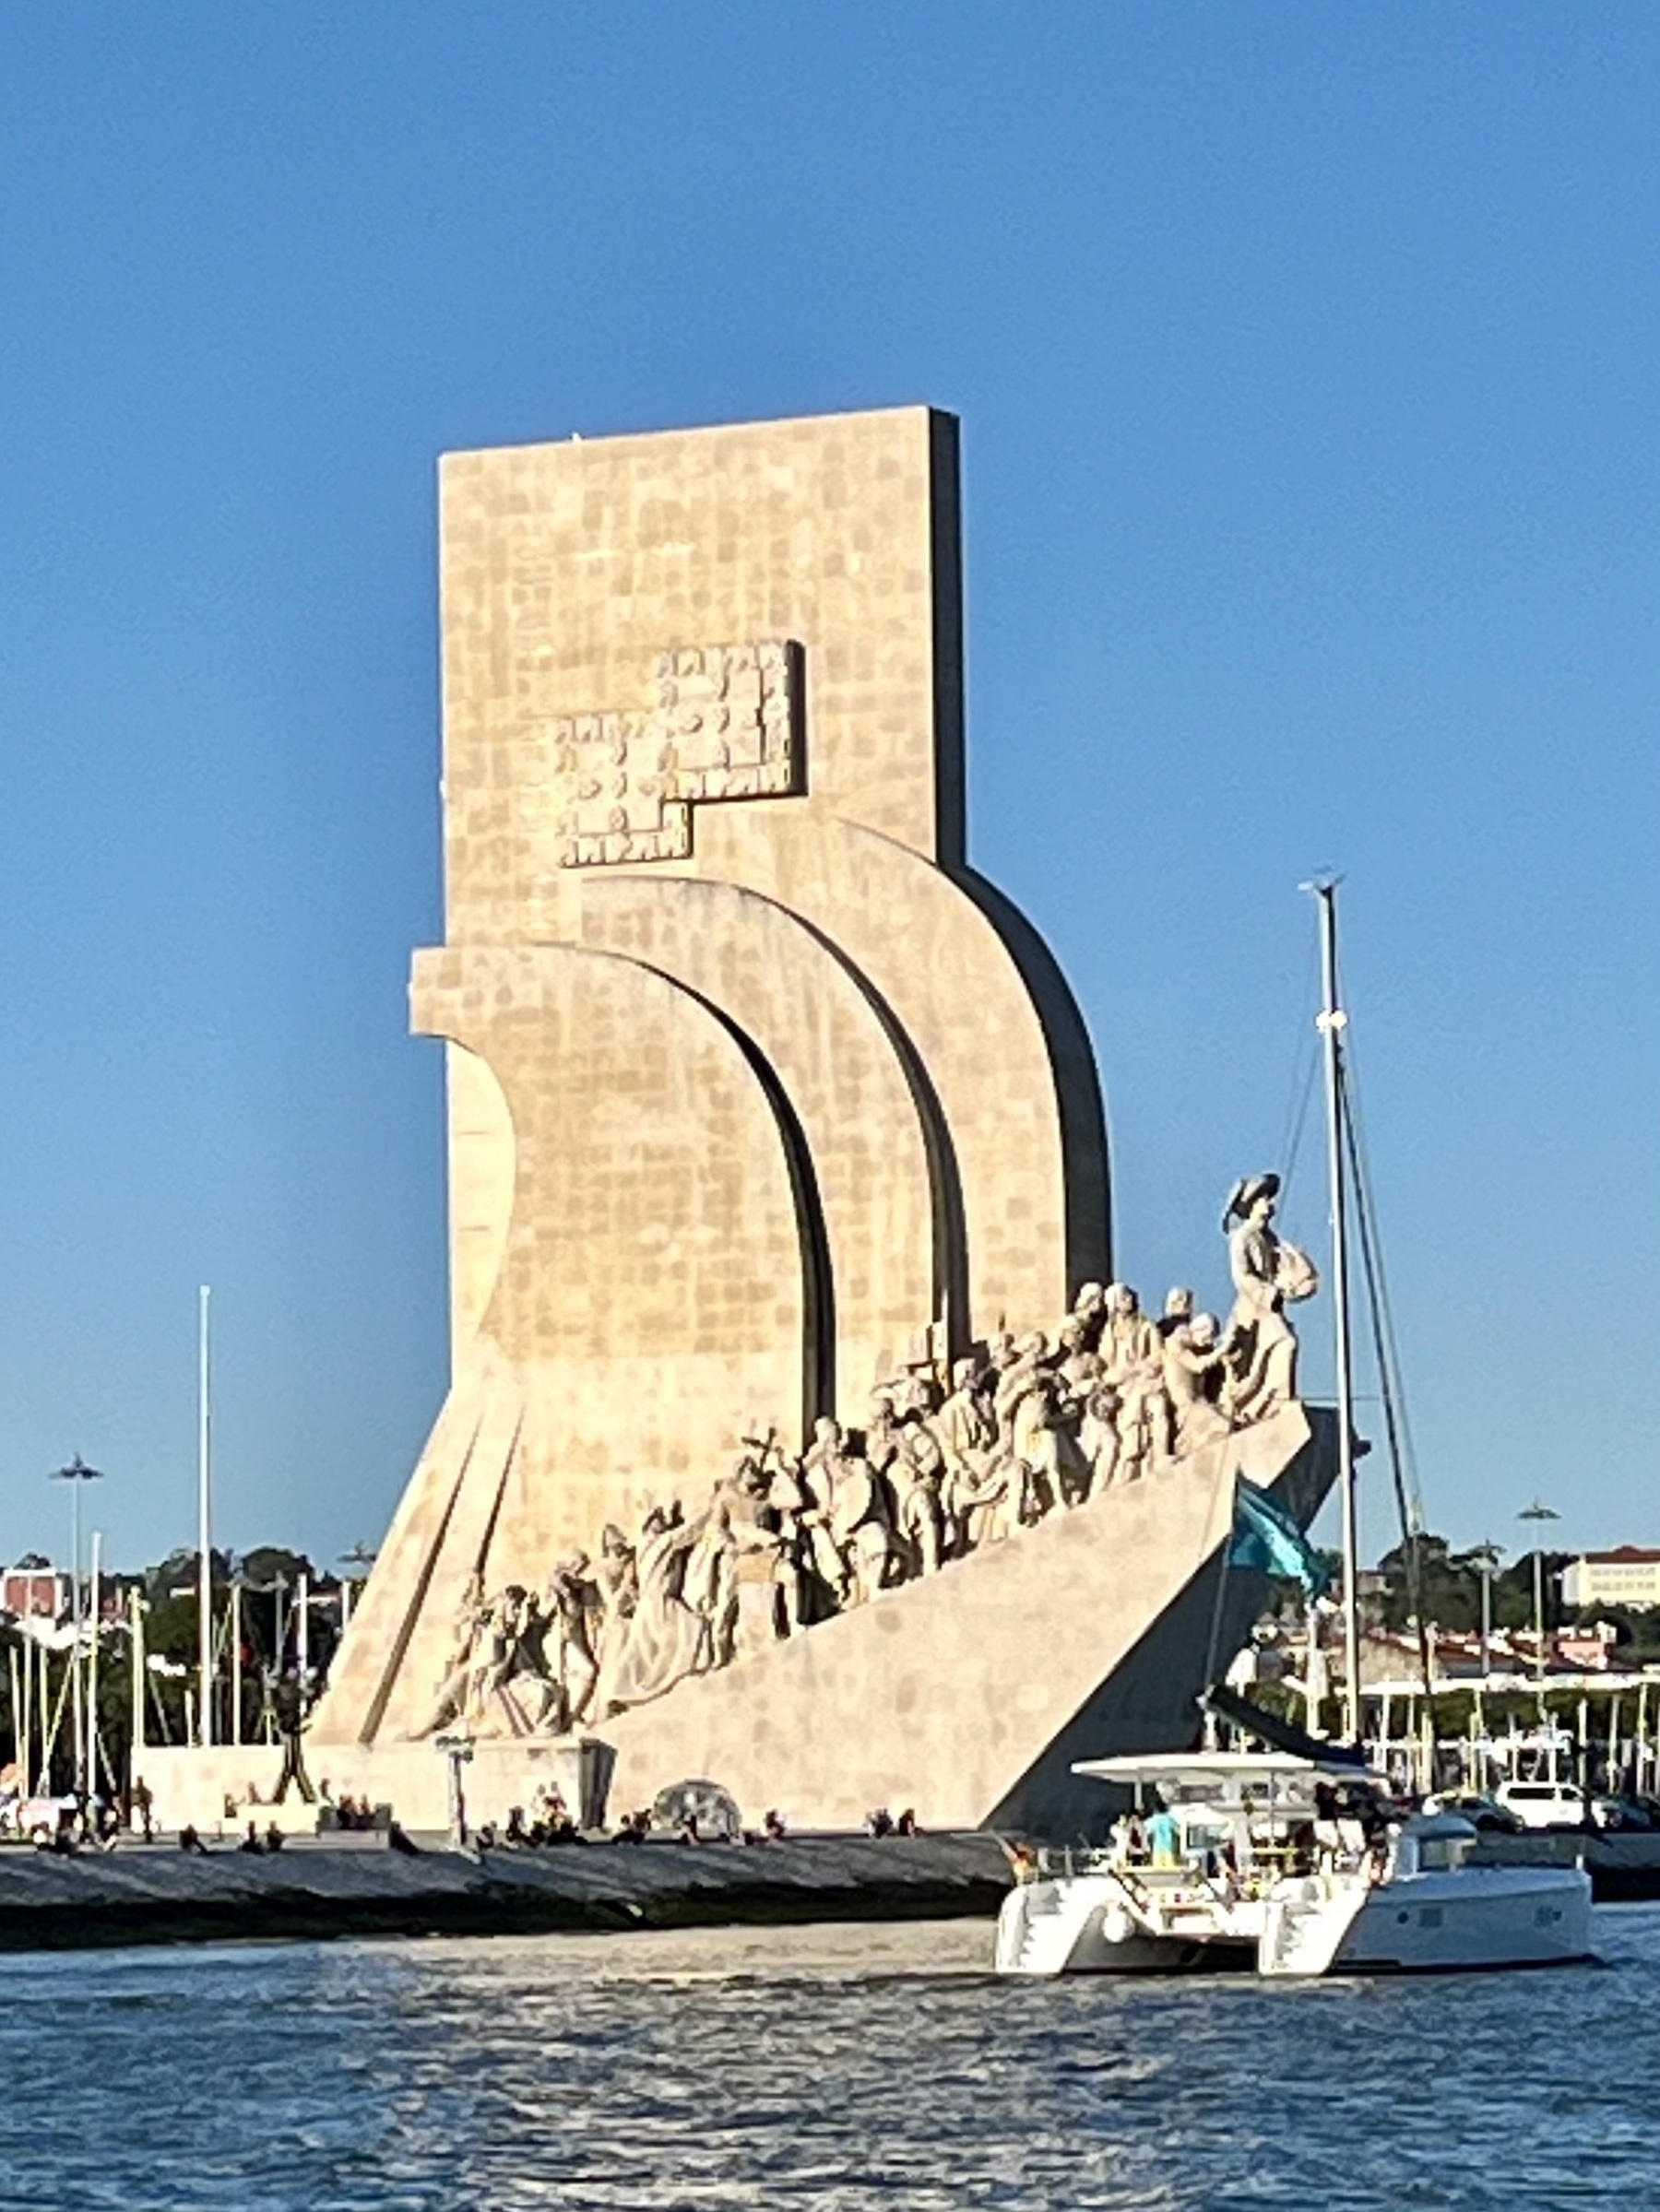 A monument featuring sculptural figures ascending along its edge, stands beside a marina with boats, under a clear blue sky.